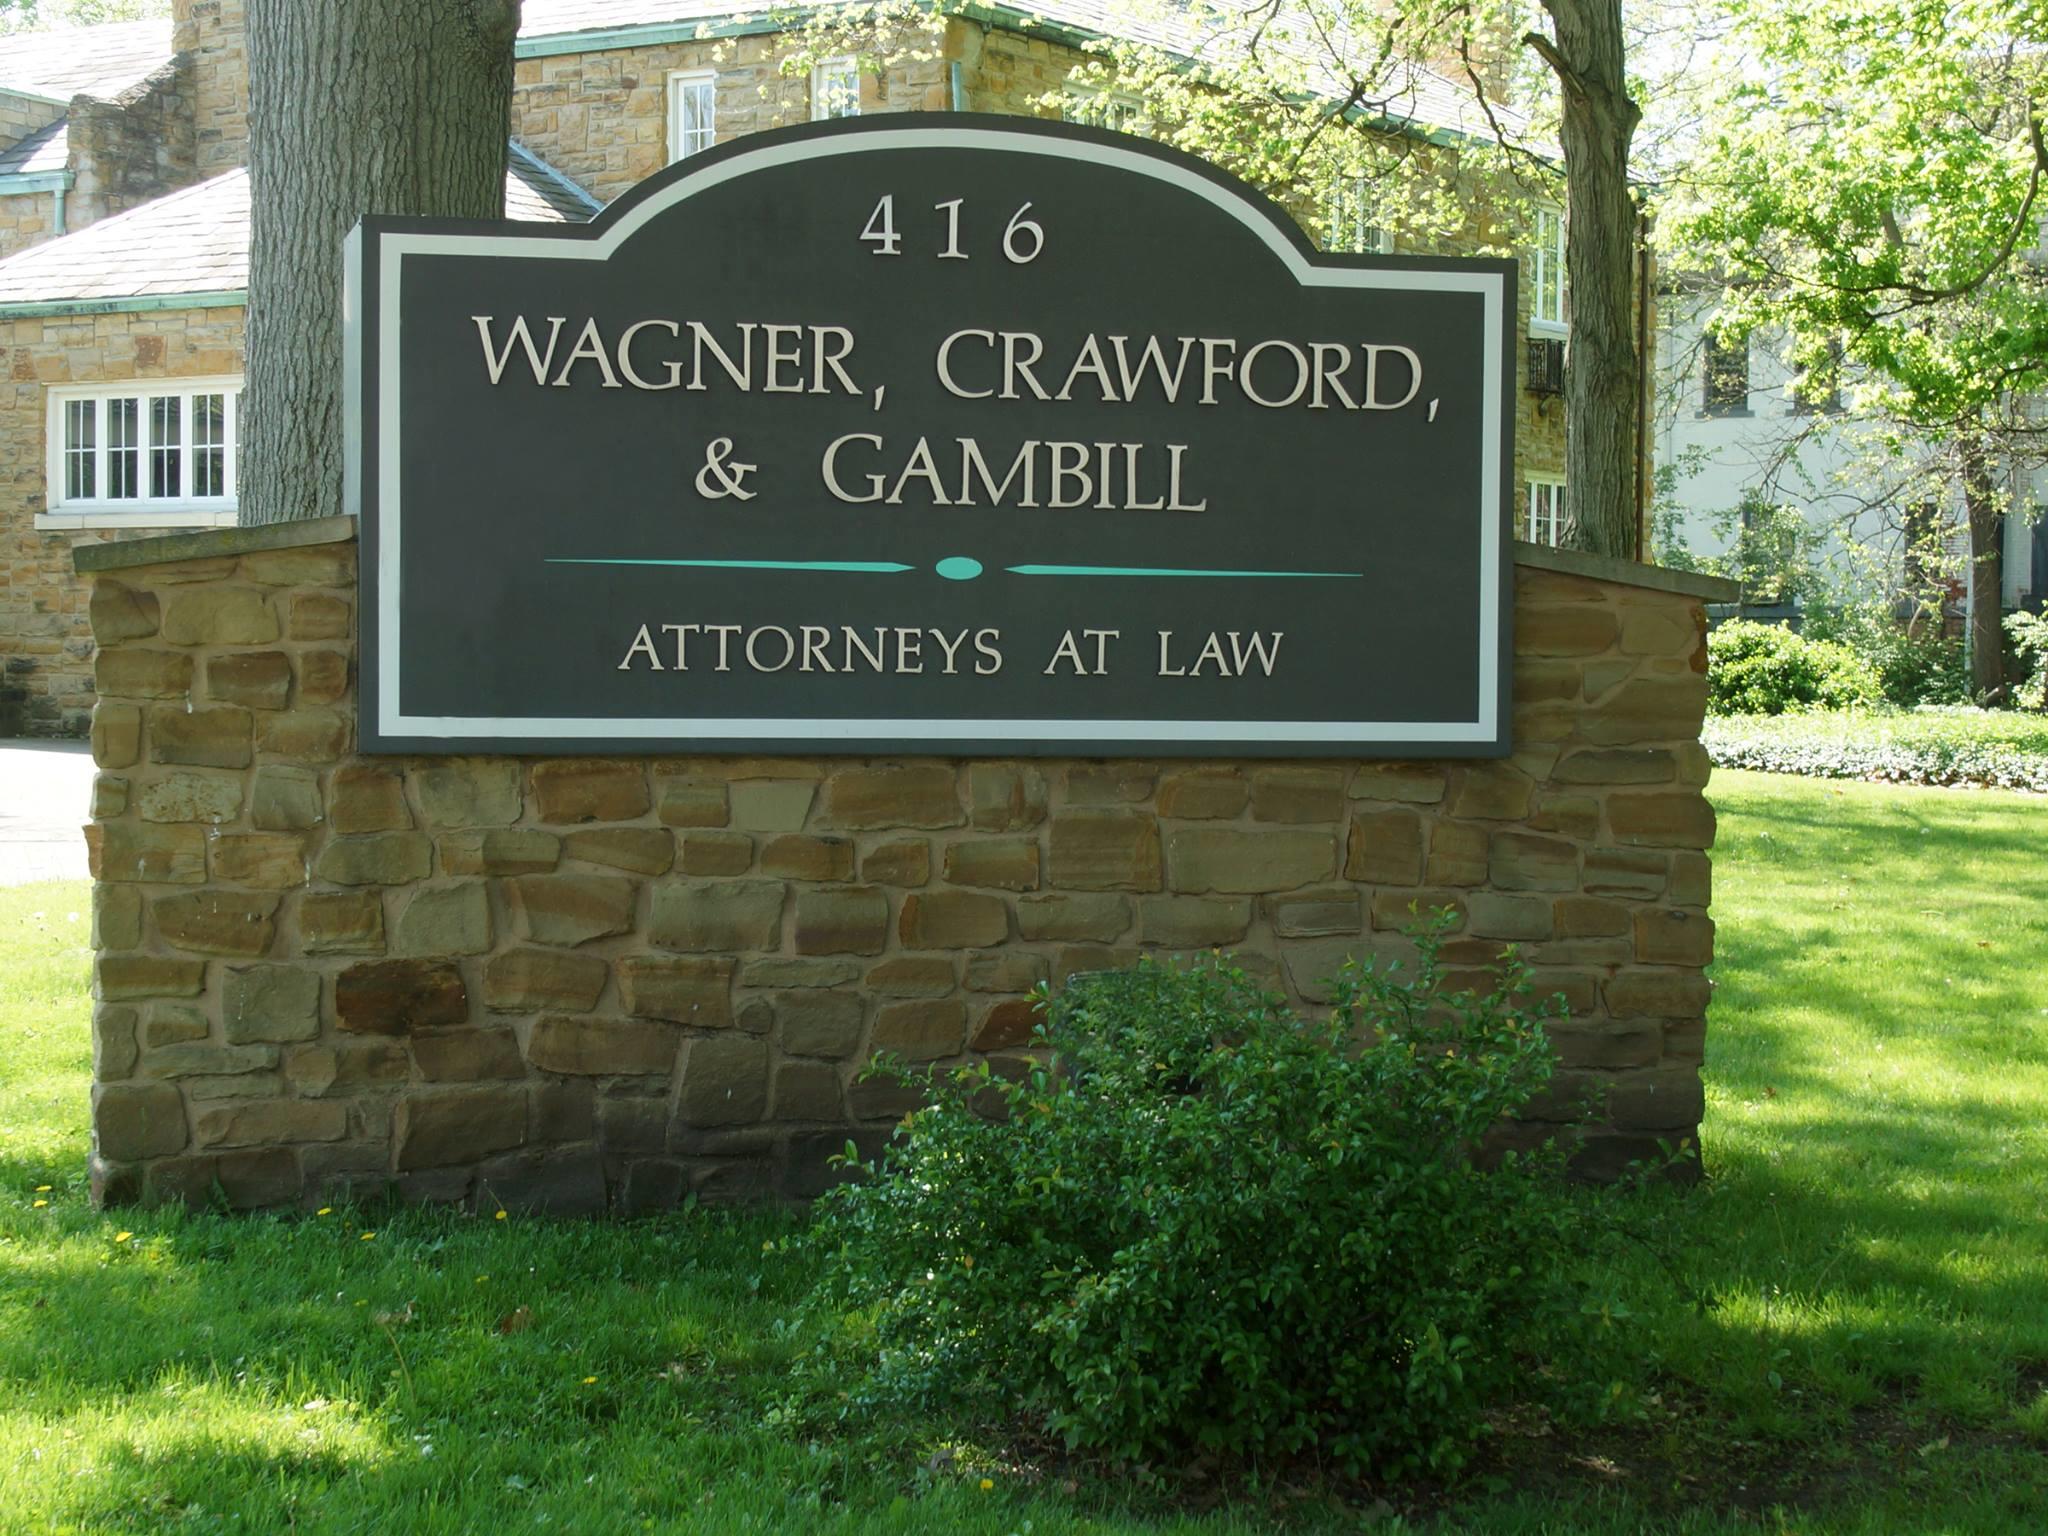 Wagner, Crawford & Gambill Attorneys at Law Photo